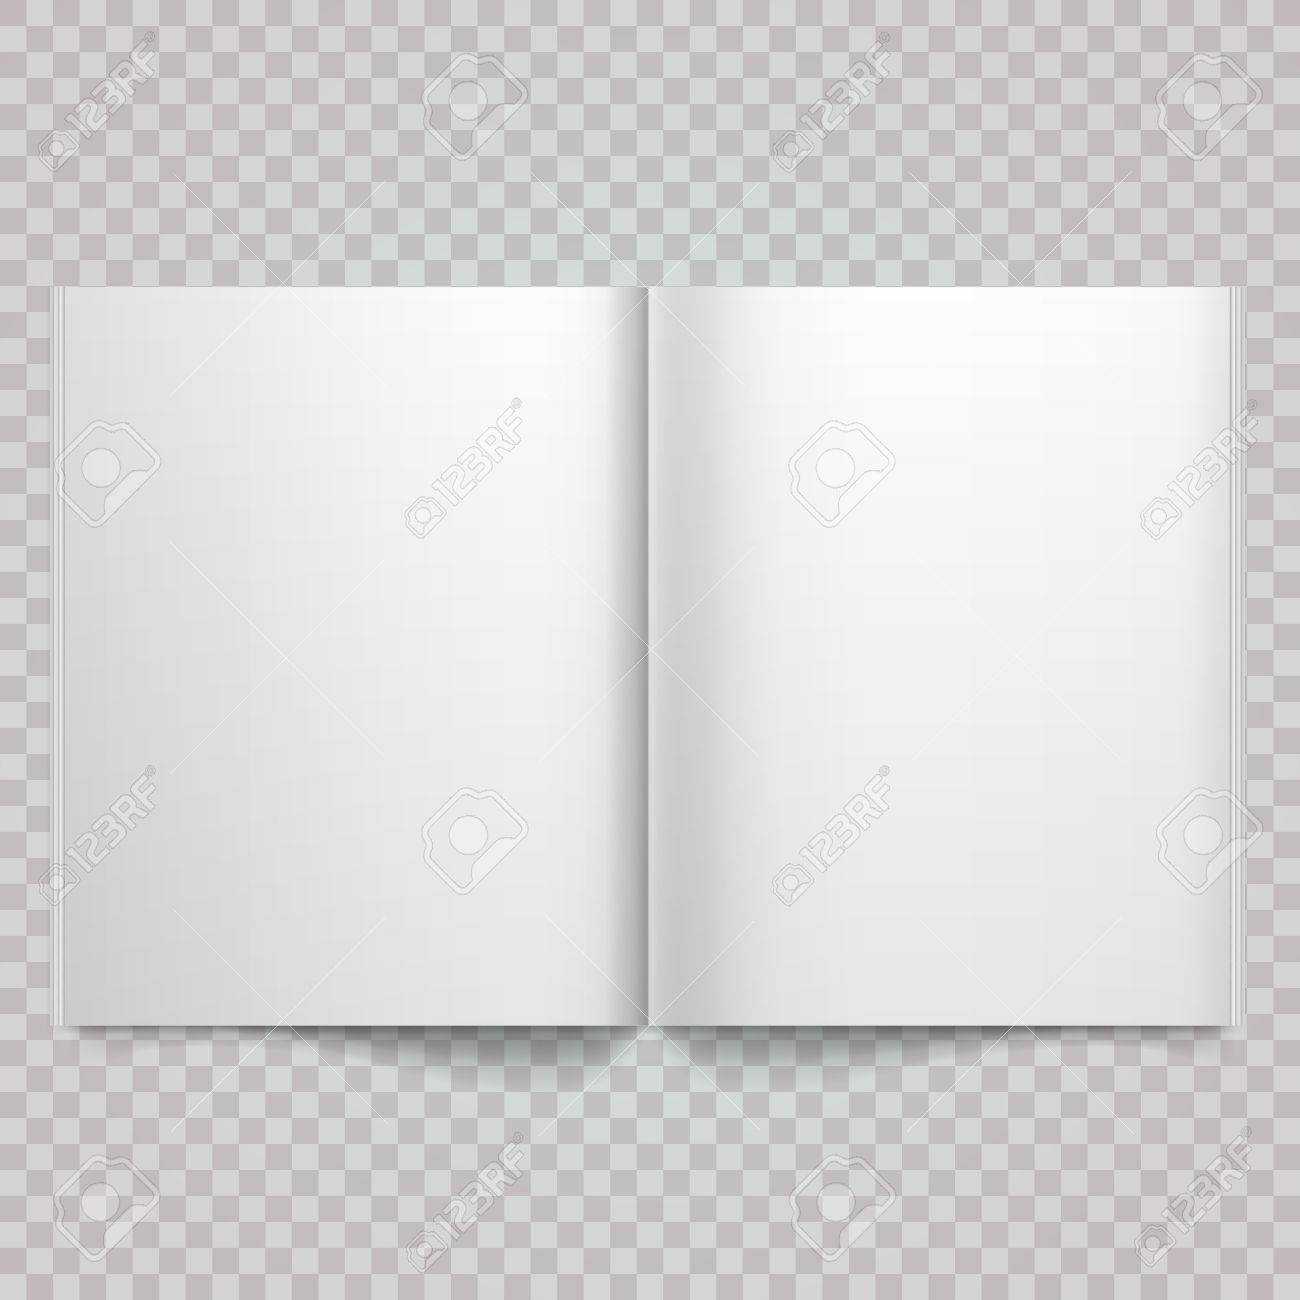 Open Magazine Double Page Spread With Blank Pages. Isolated White.. Throughout Blank Magazine Spread Template